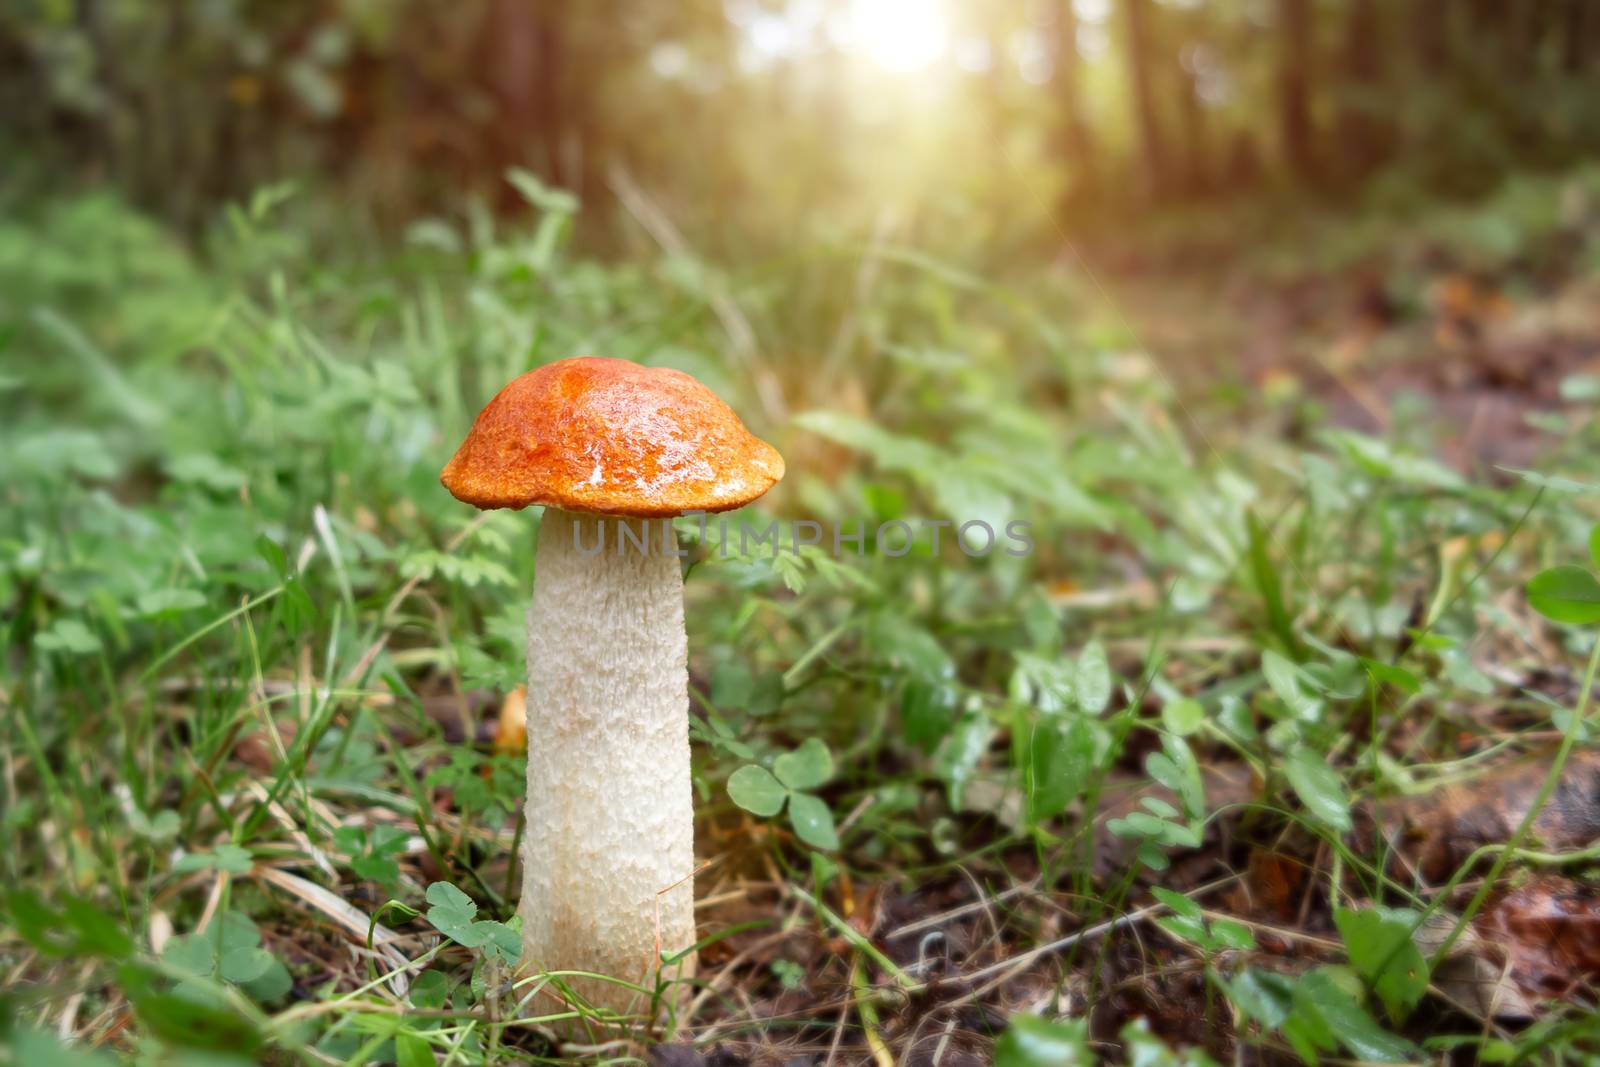 beautiful little mushroom Leccinum known as a Orange birch bolete, growing in a forest at sunrise- image.